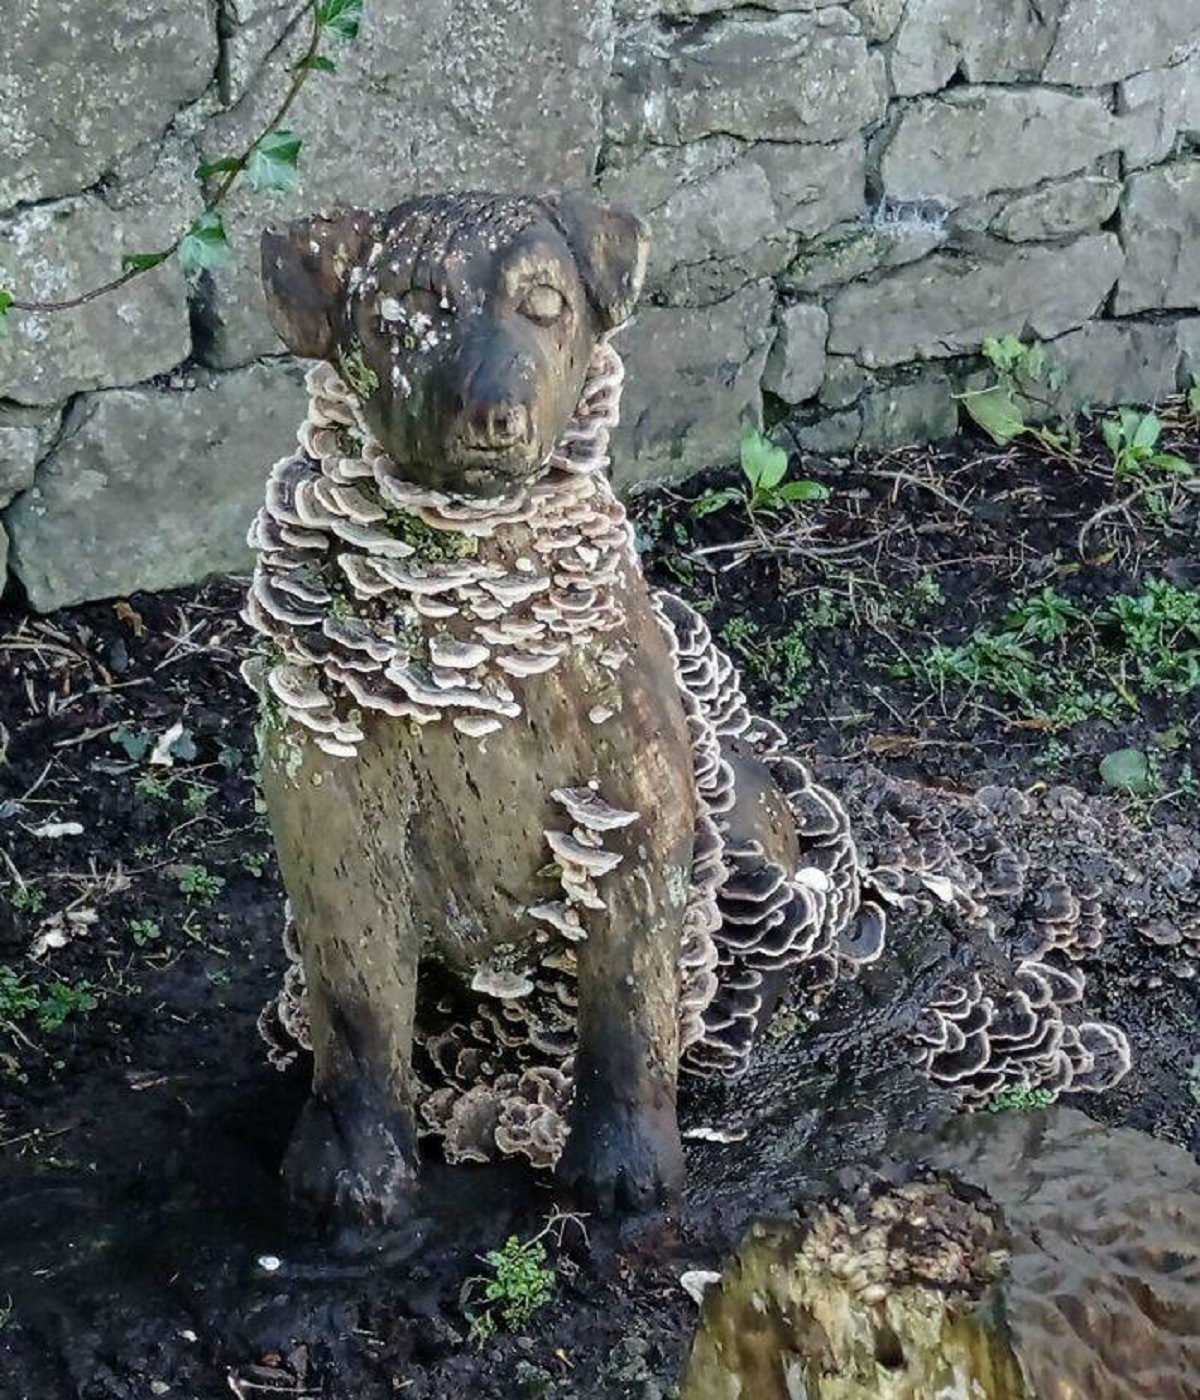 "Wooden Dog Sculpture In The Local Park Got A Little Mycology Make-Over"